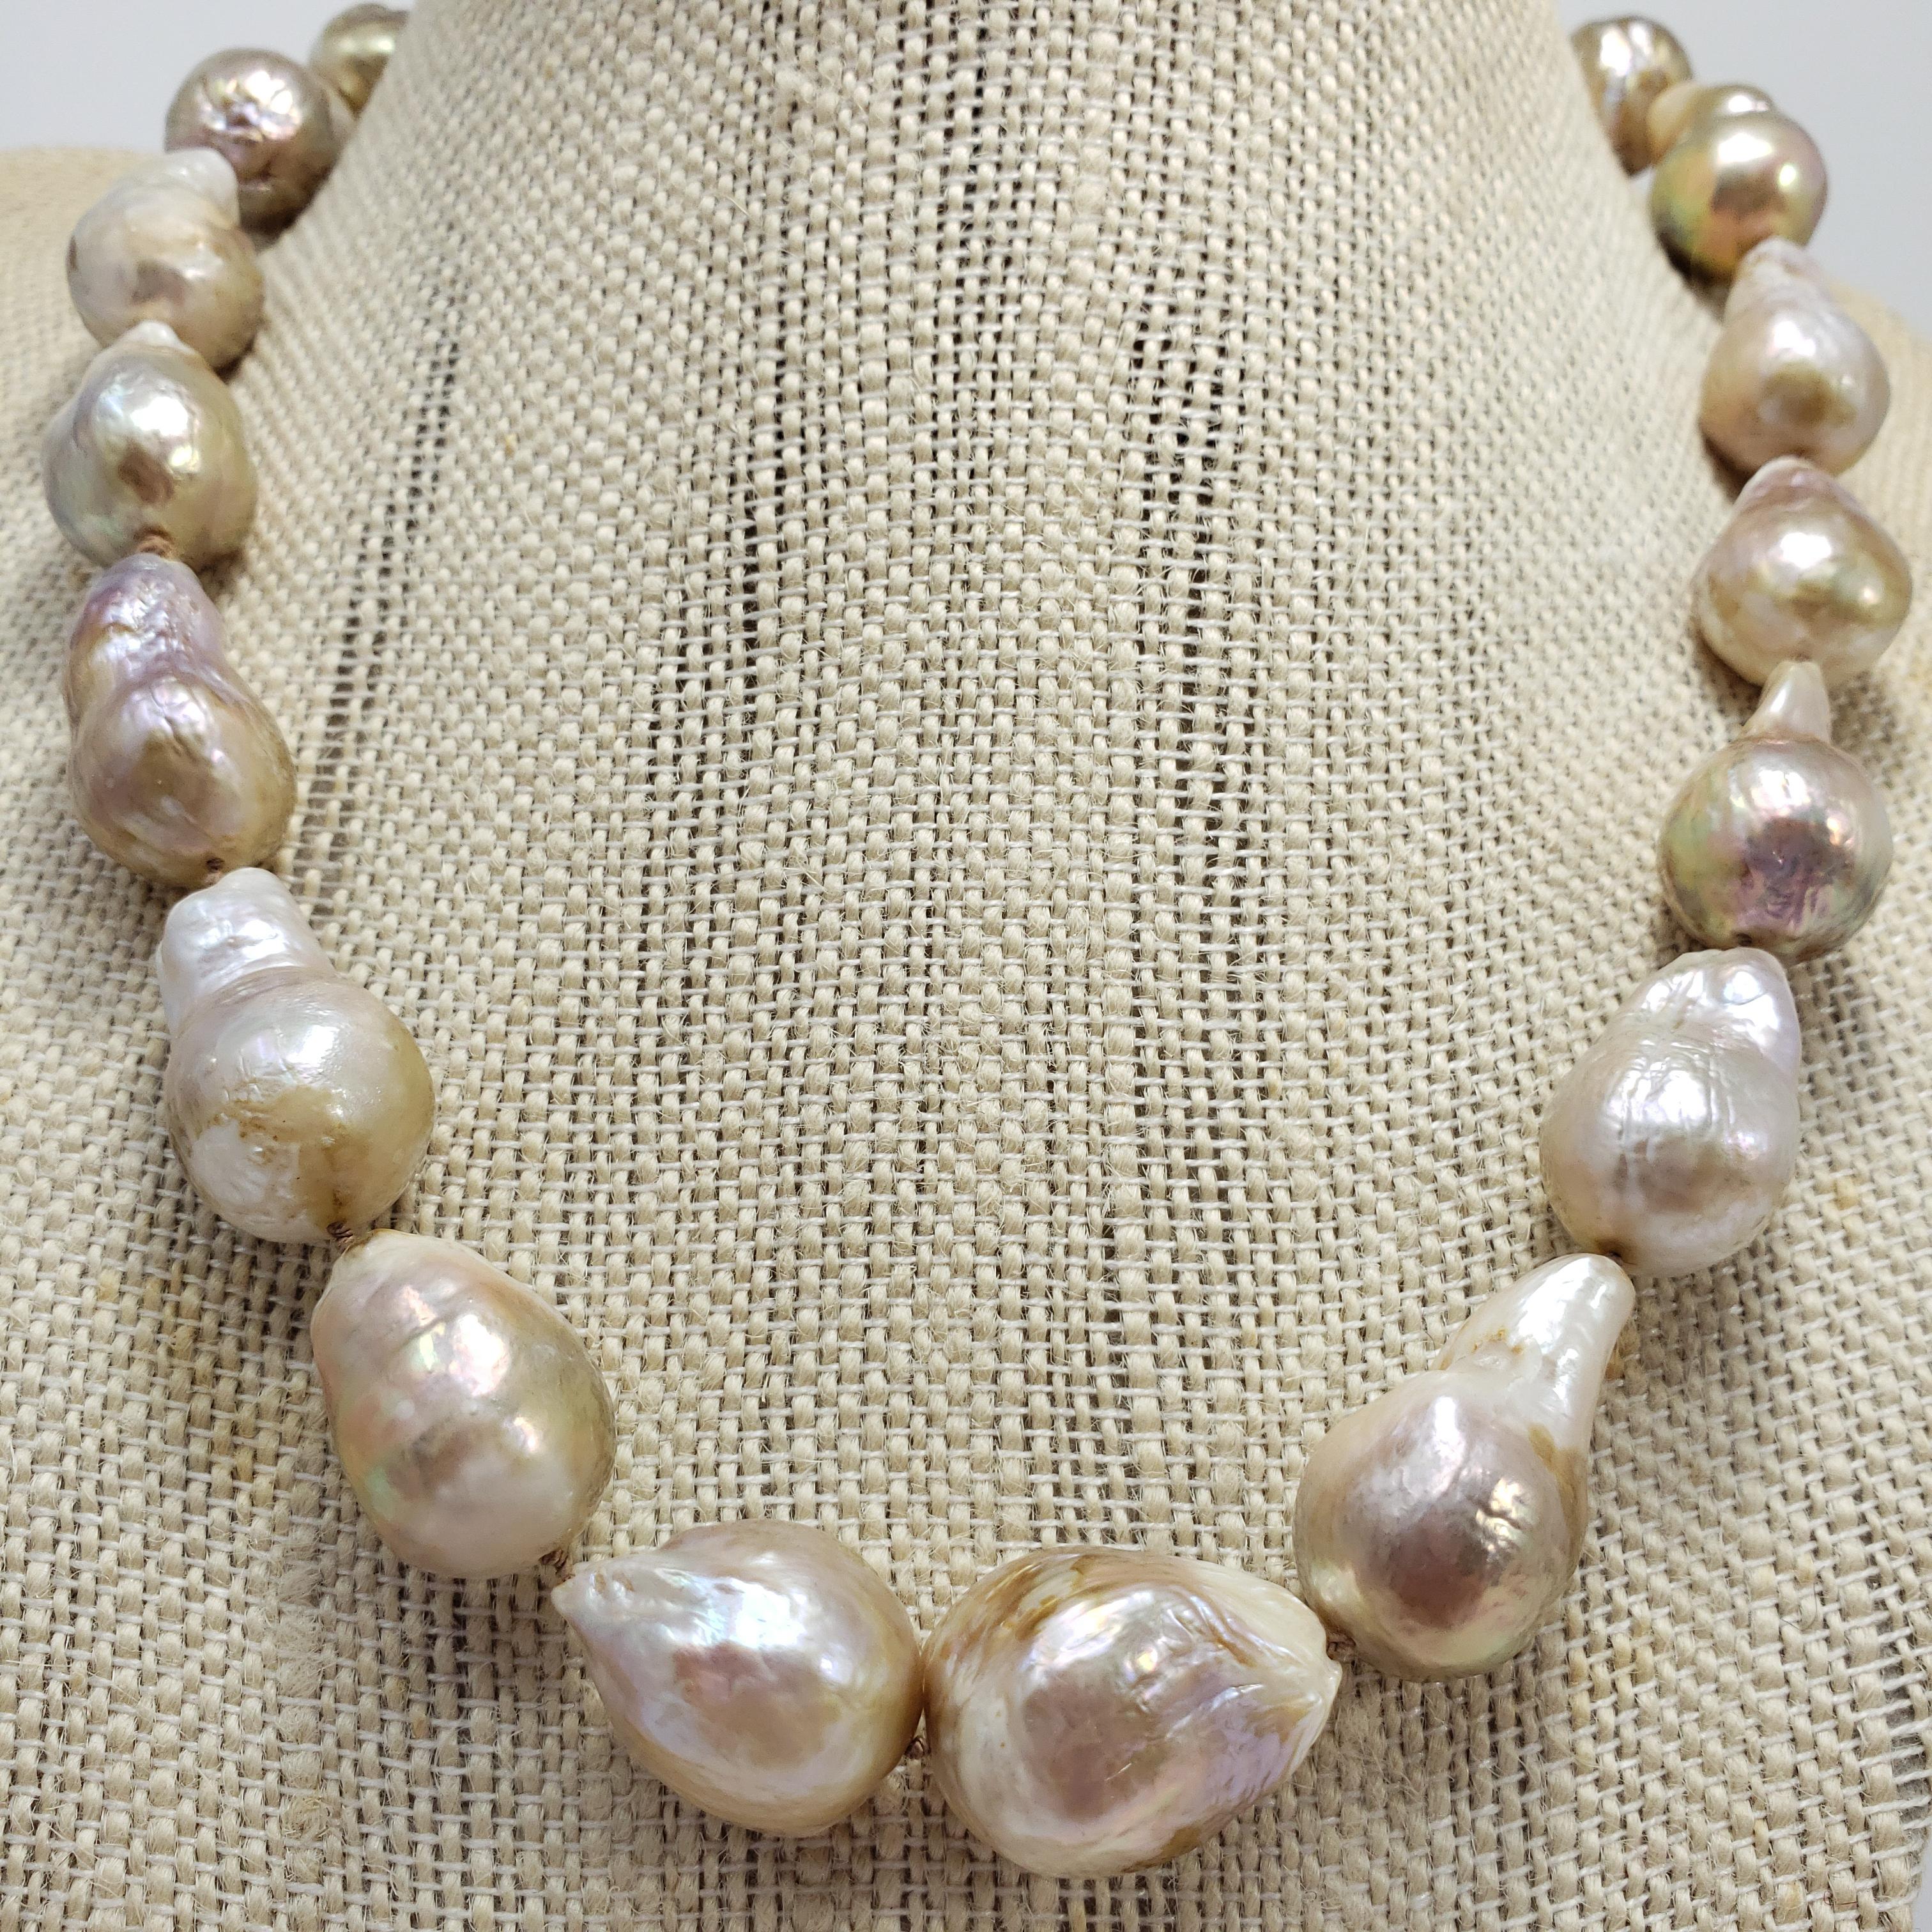 An exquisite strand of South Sea baroque pearls on a sterling silver S-hook clasp. Gorgeous color gradient! A classy necklace perfect for any style.

Each pearl approximately 2.1 cm x 1.35 cm
Hallmarks: 925